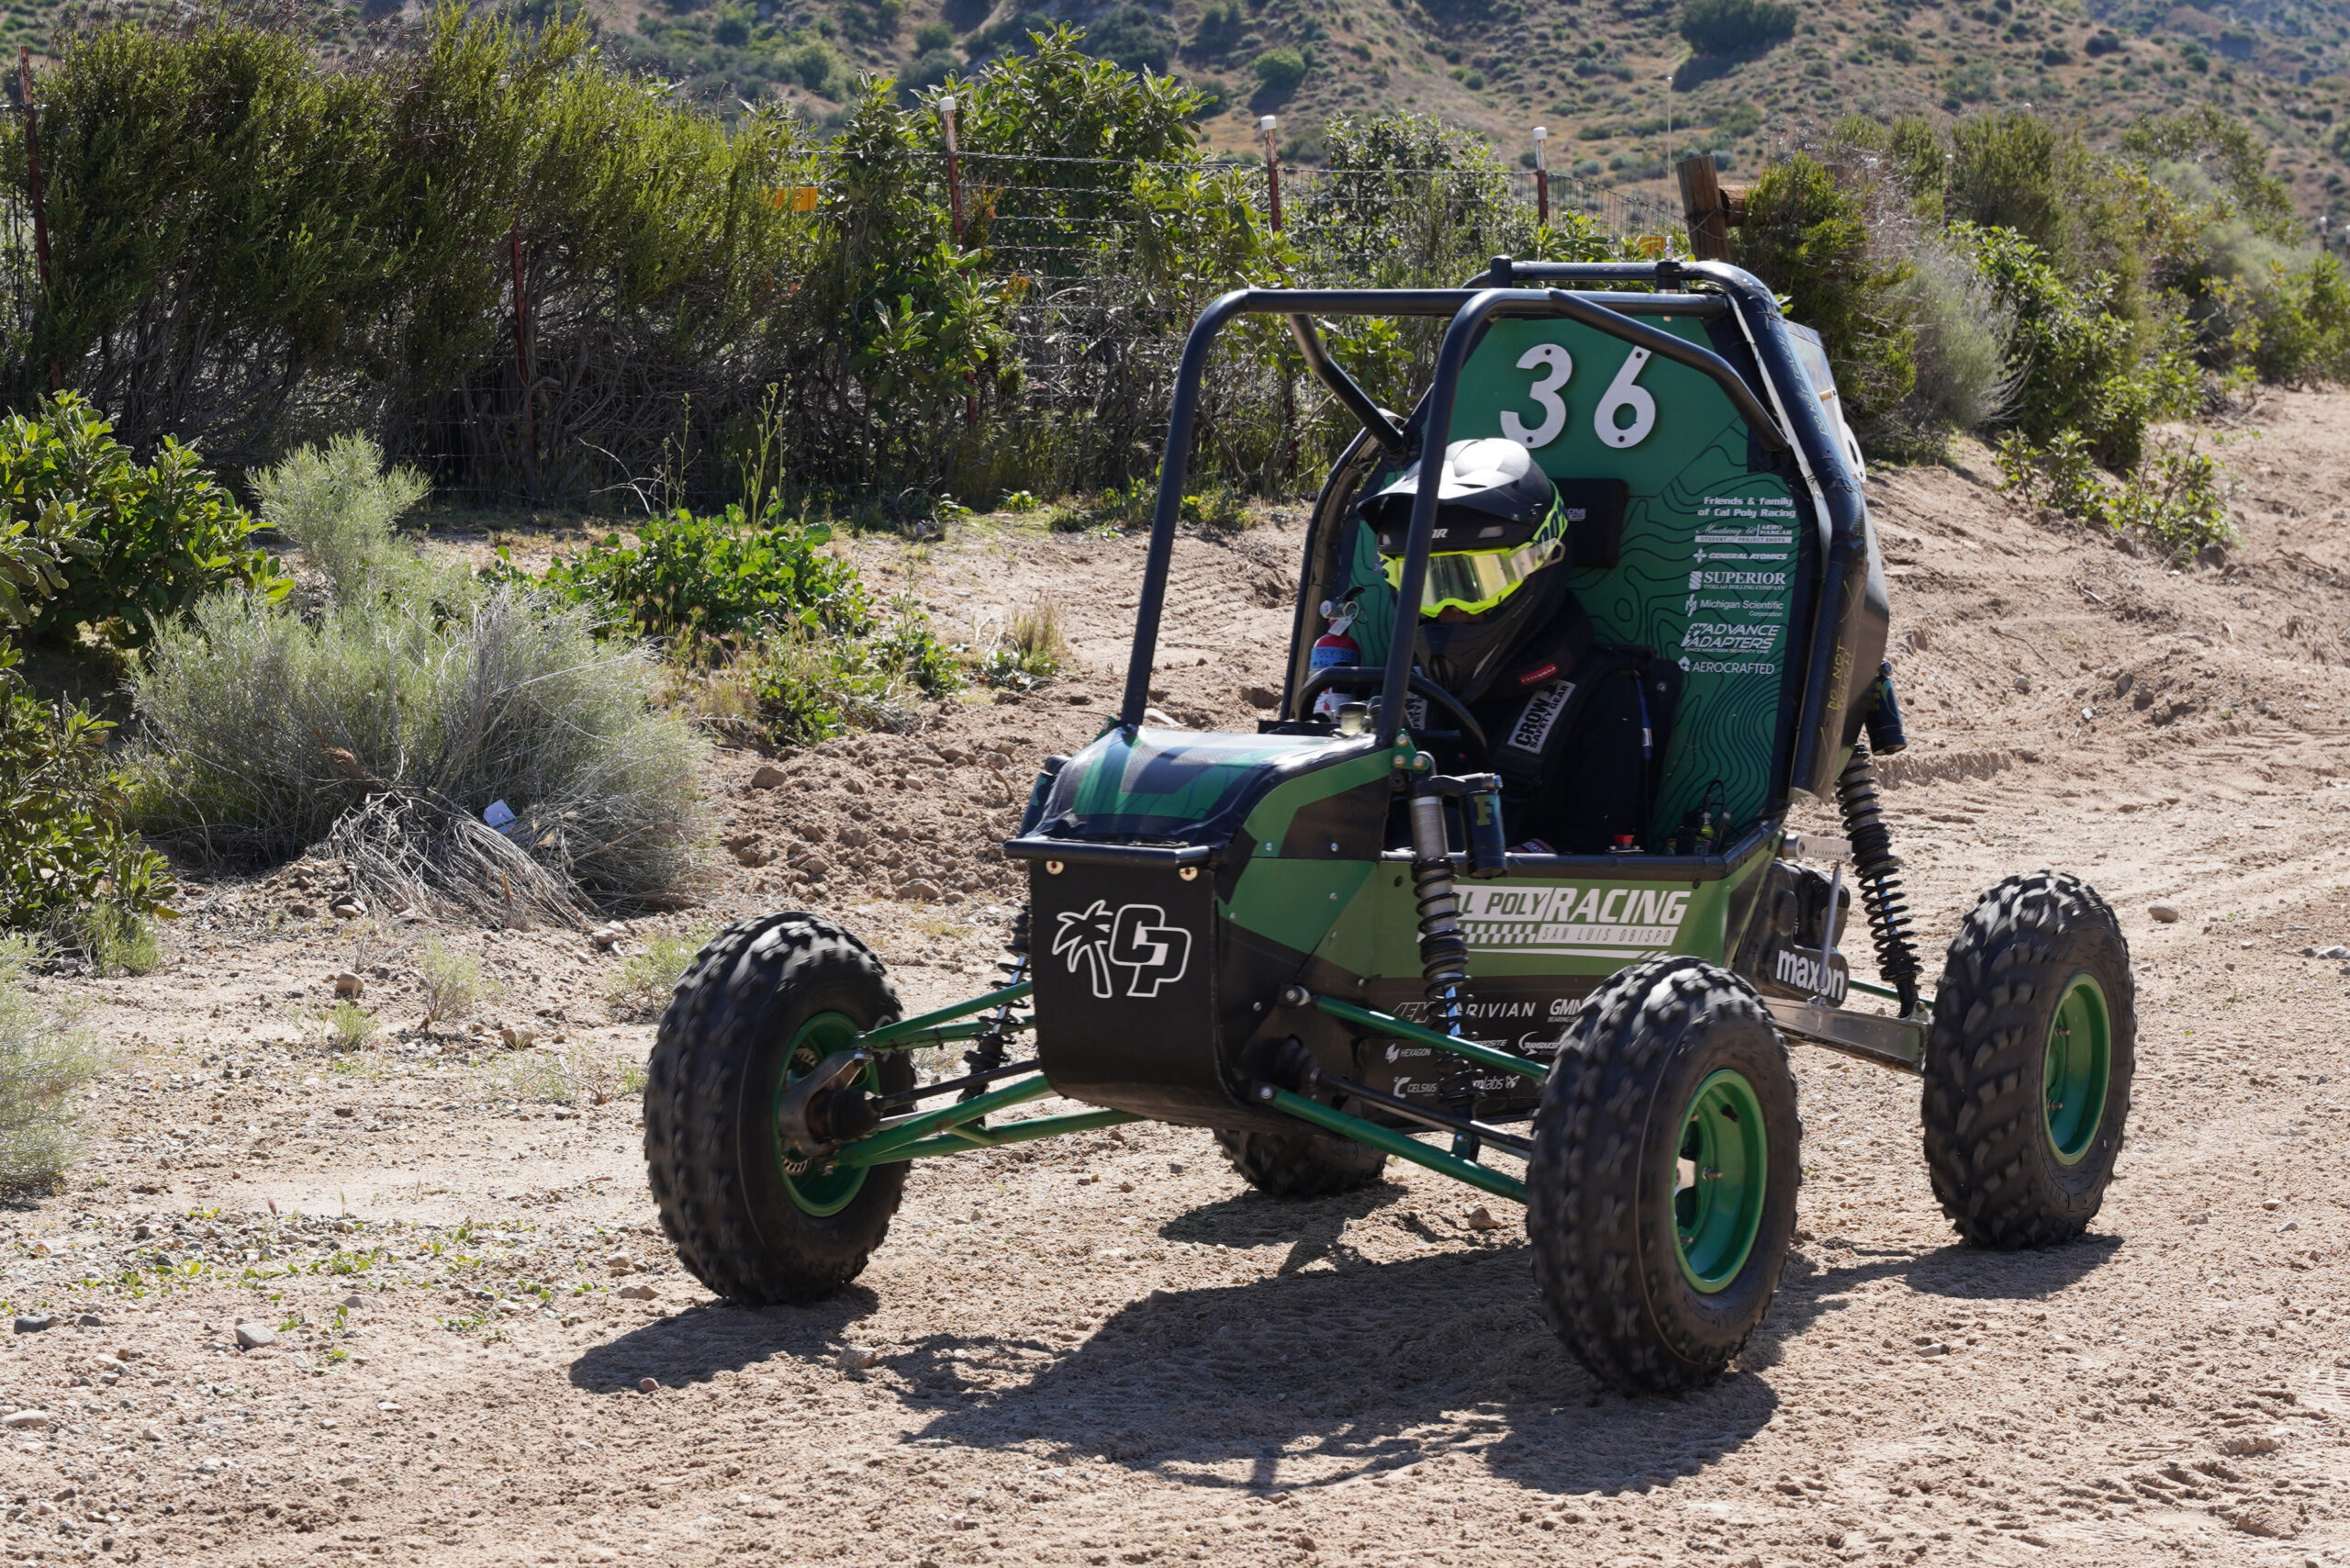 Cal Poly's Baja vehicle navigates the course in Gorman